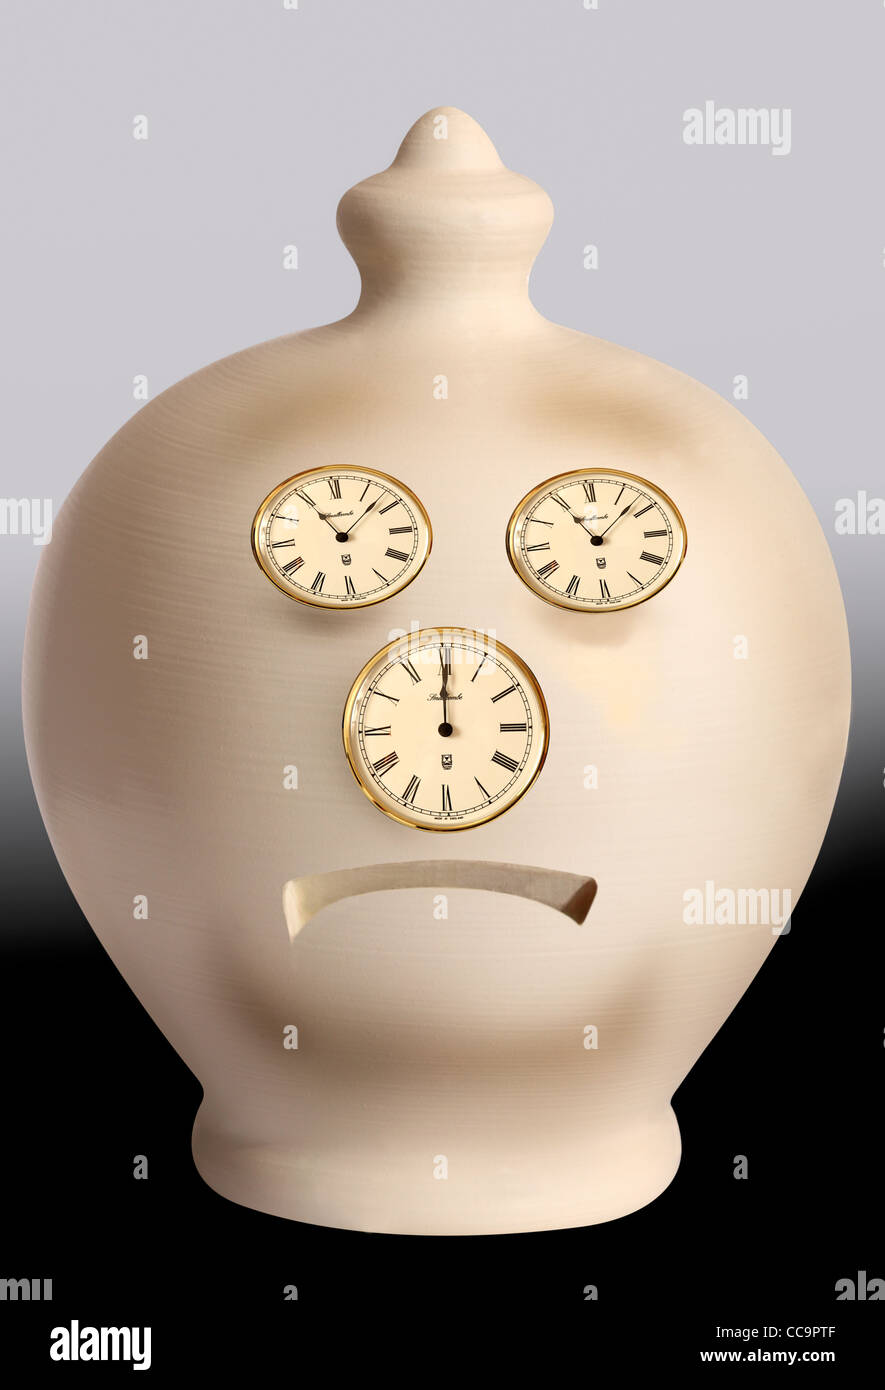 Intended as a slightly humorus look at poor savings rates, this image shows a sad face made from clock faces to indicate time running out for saving Stock Photo